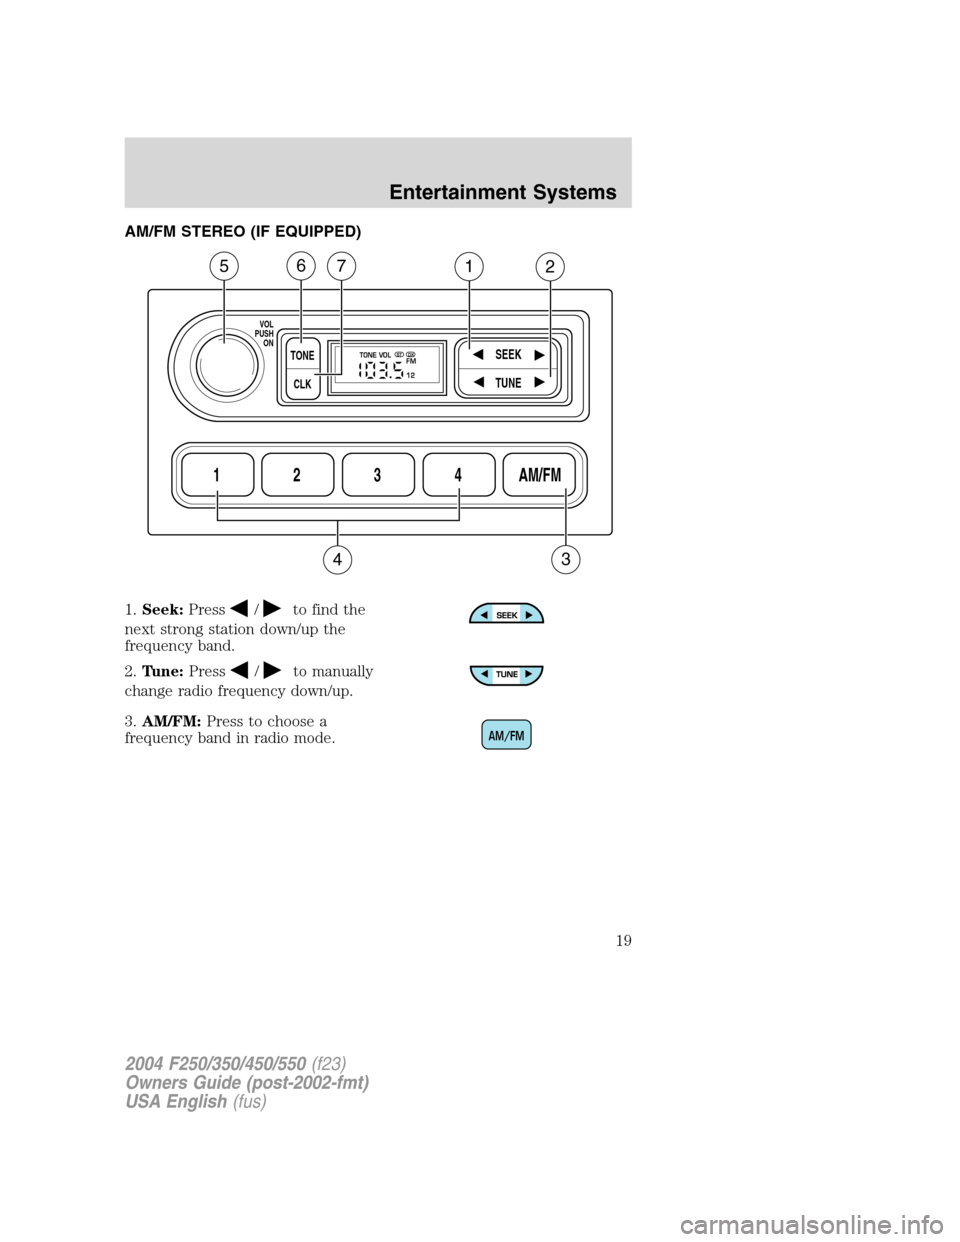 FORD SUPER DUTY 2004 1.G Owners Manual AM/FM STEREO (IF EQUIPPED)
1.Seek:Press
/to find the
next strong station down/up the
frequency band.
2.Tune:Press
/to manually
change radio frequency down/up.
3.AM/FM:Press to choose a
frequency band 